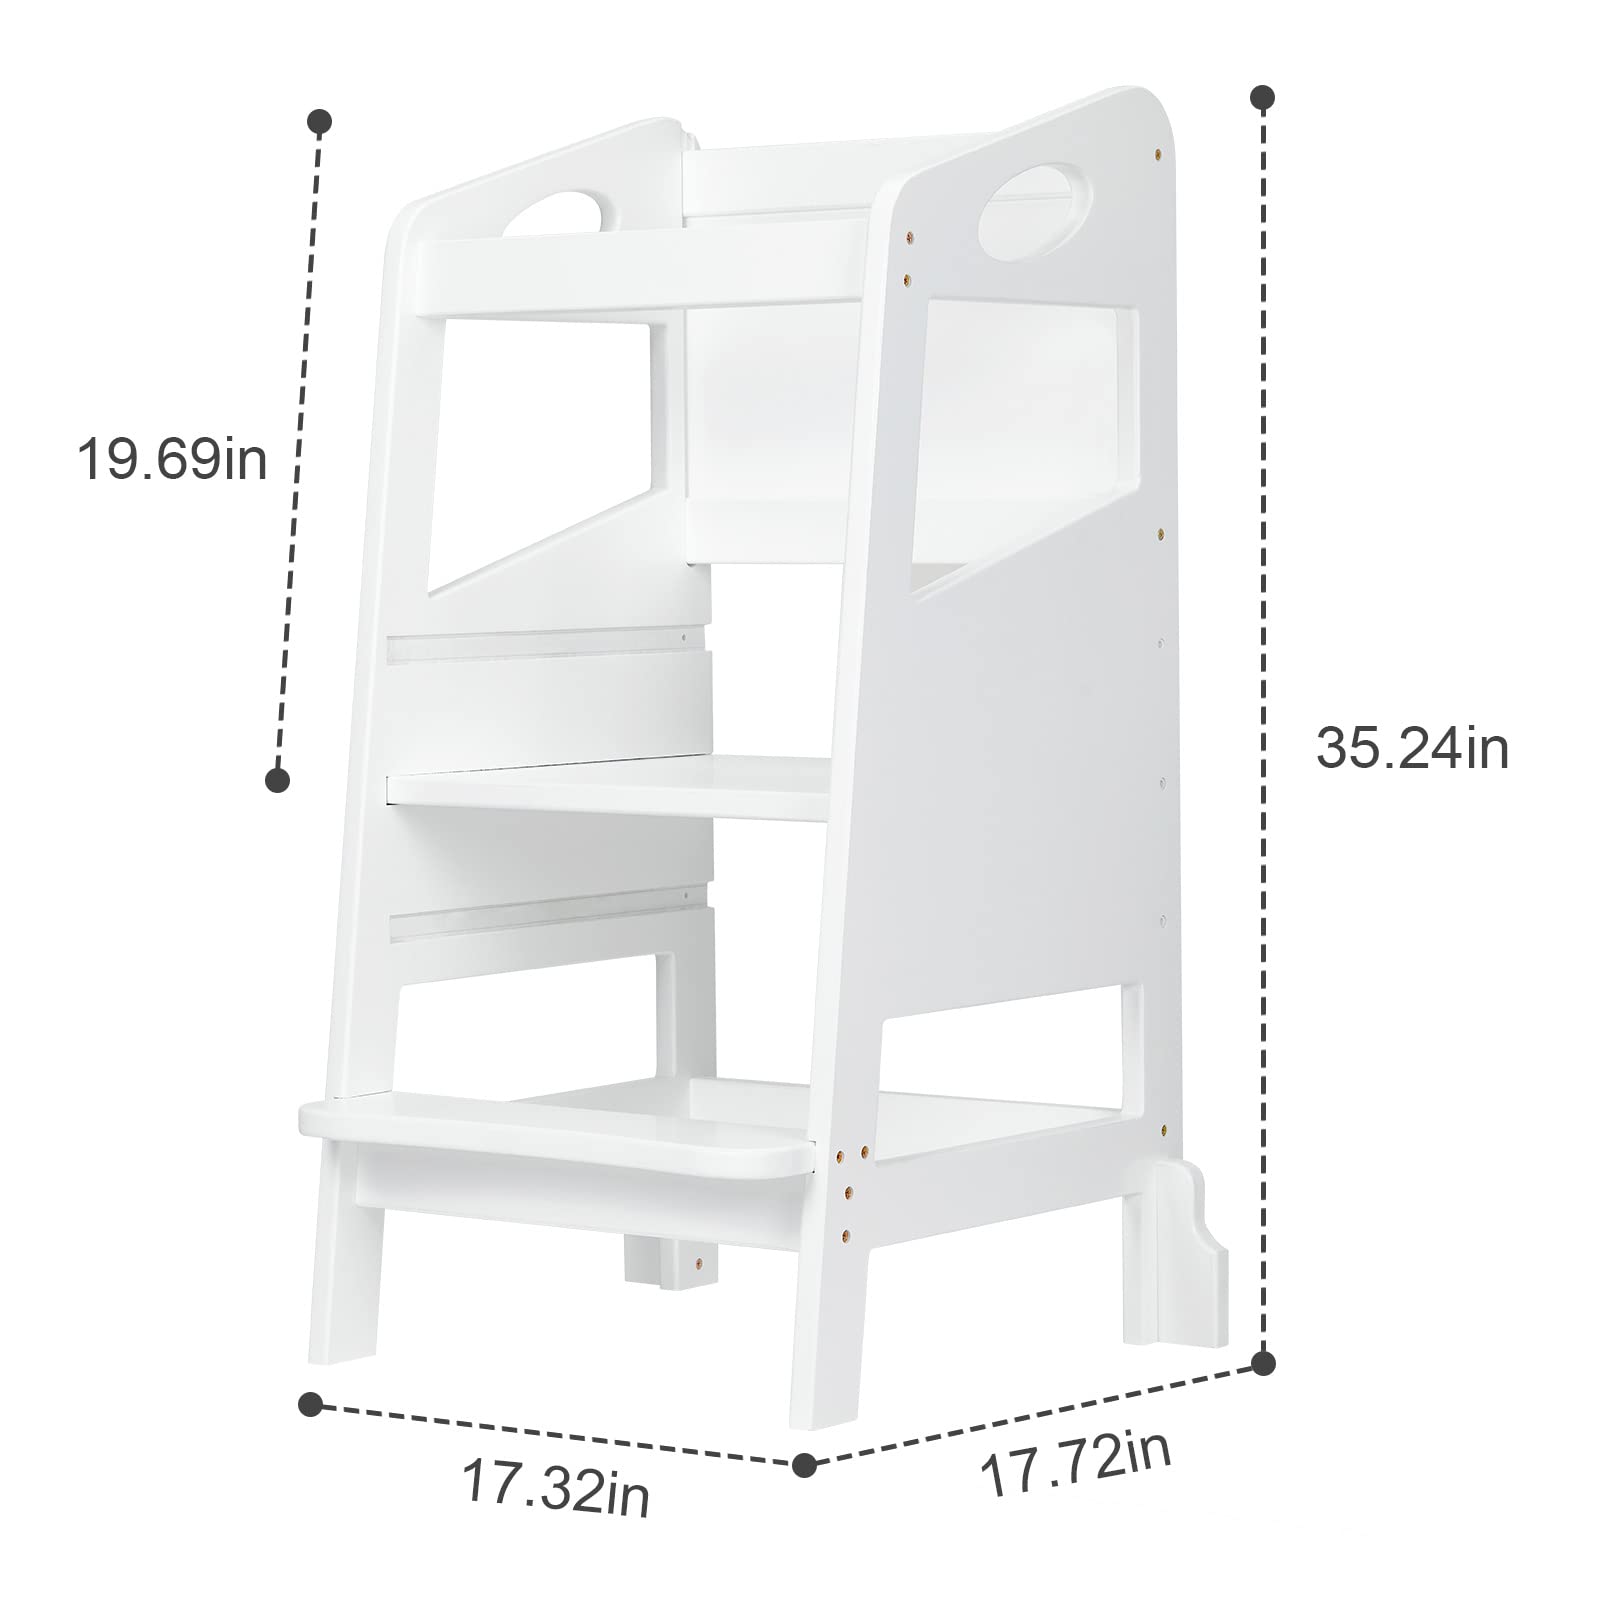 Wooden Toddler Tower for Learning,GAOMON Toddler Step Stool for Bathroom Sink&Kitchen Counter,Toddler Tower with Anti-tip Feet,Kitchen Little Helper Stool for Children,White